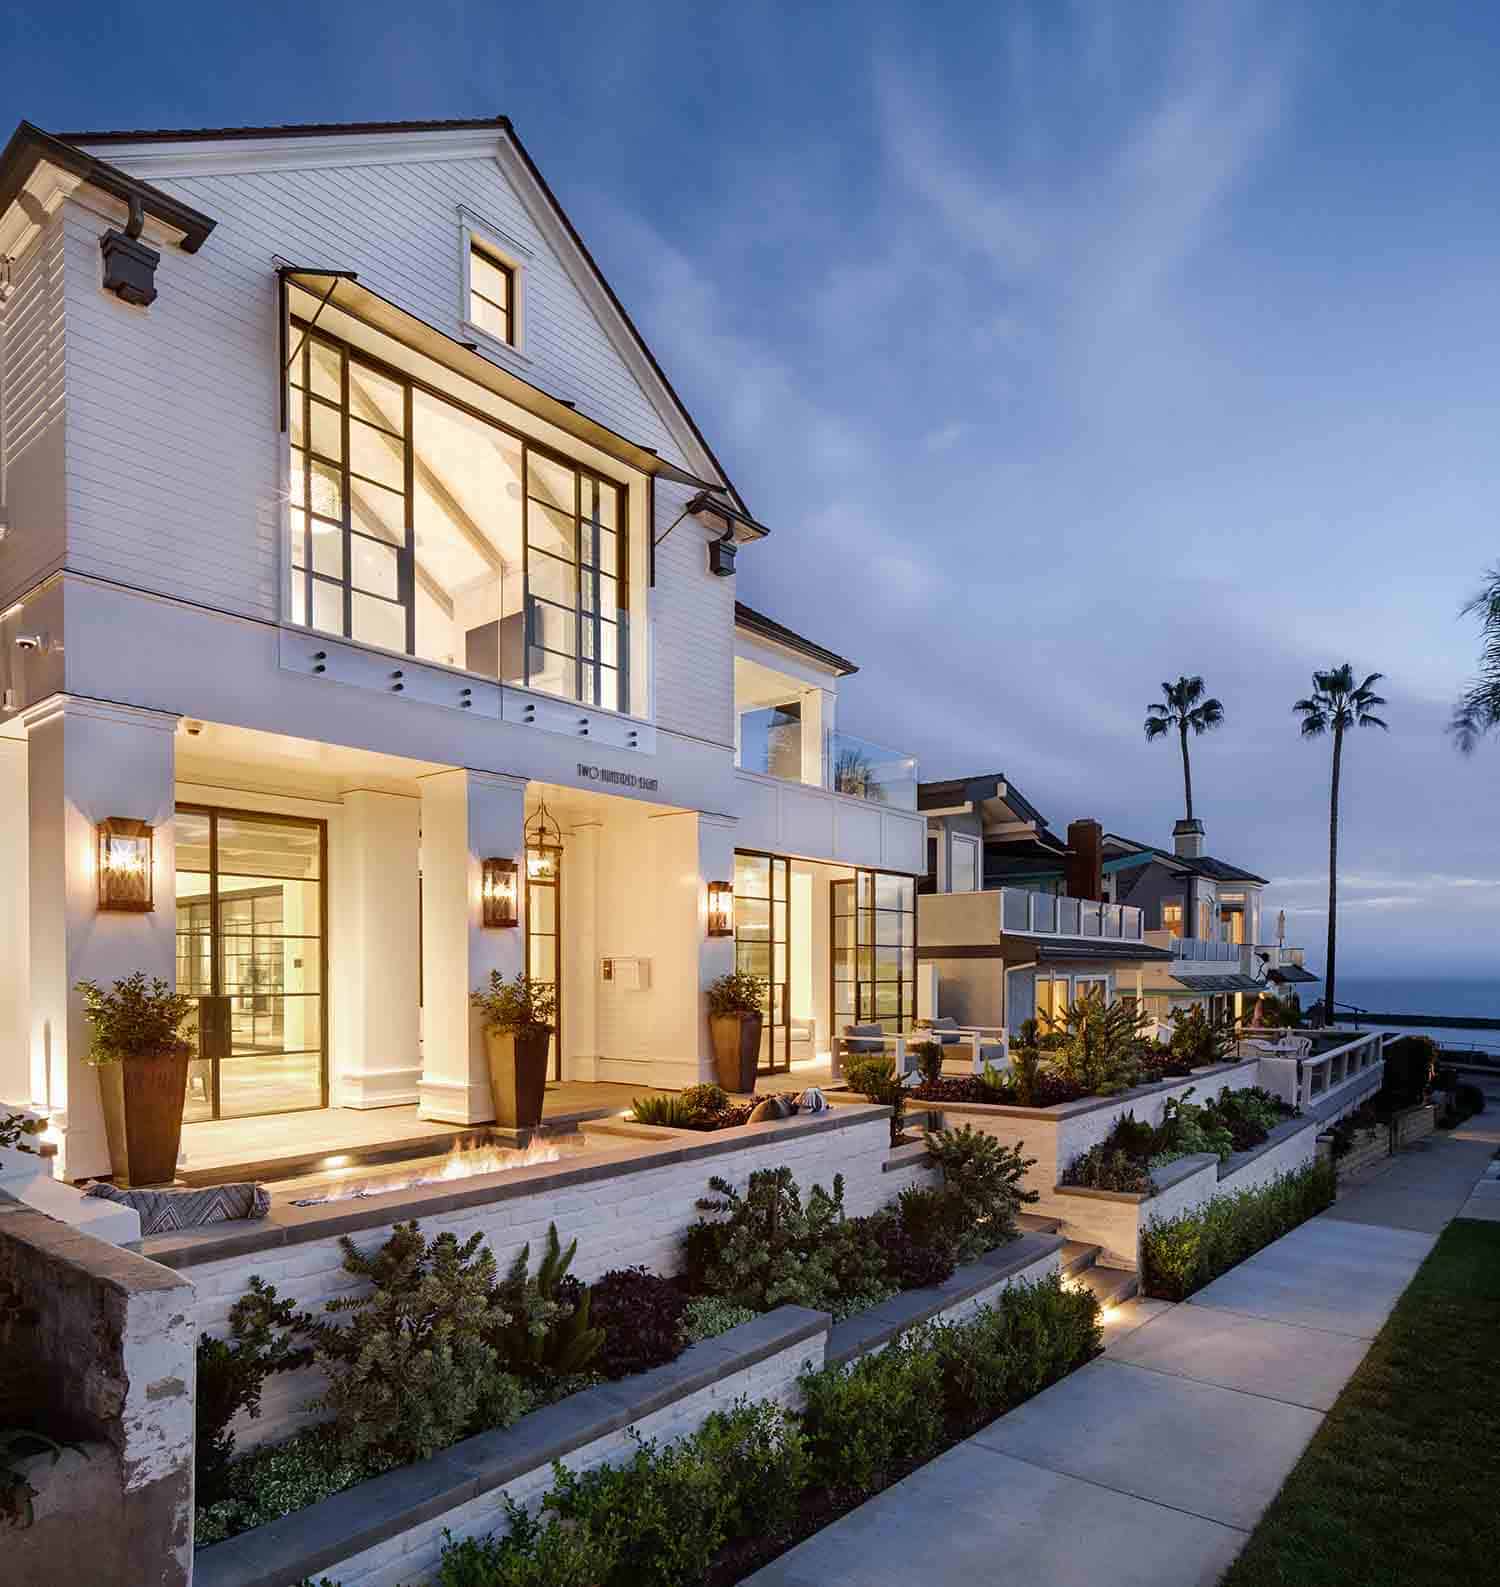 transitional-style-home-exterior-at-dusk